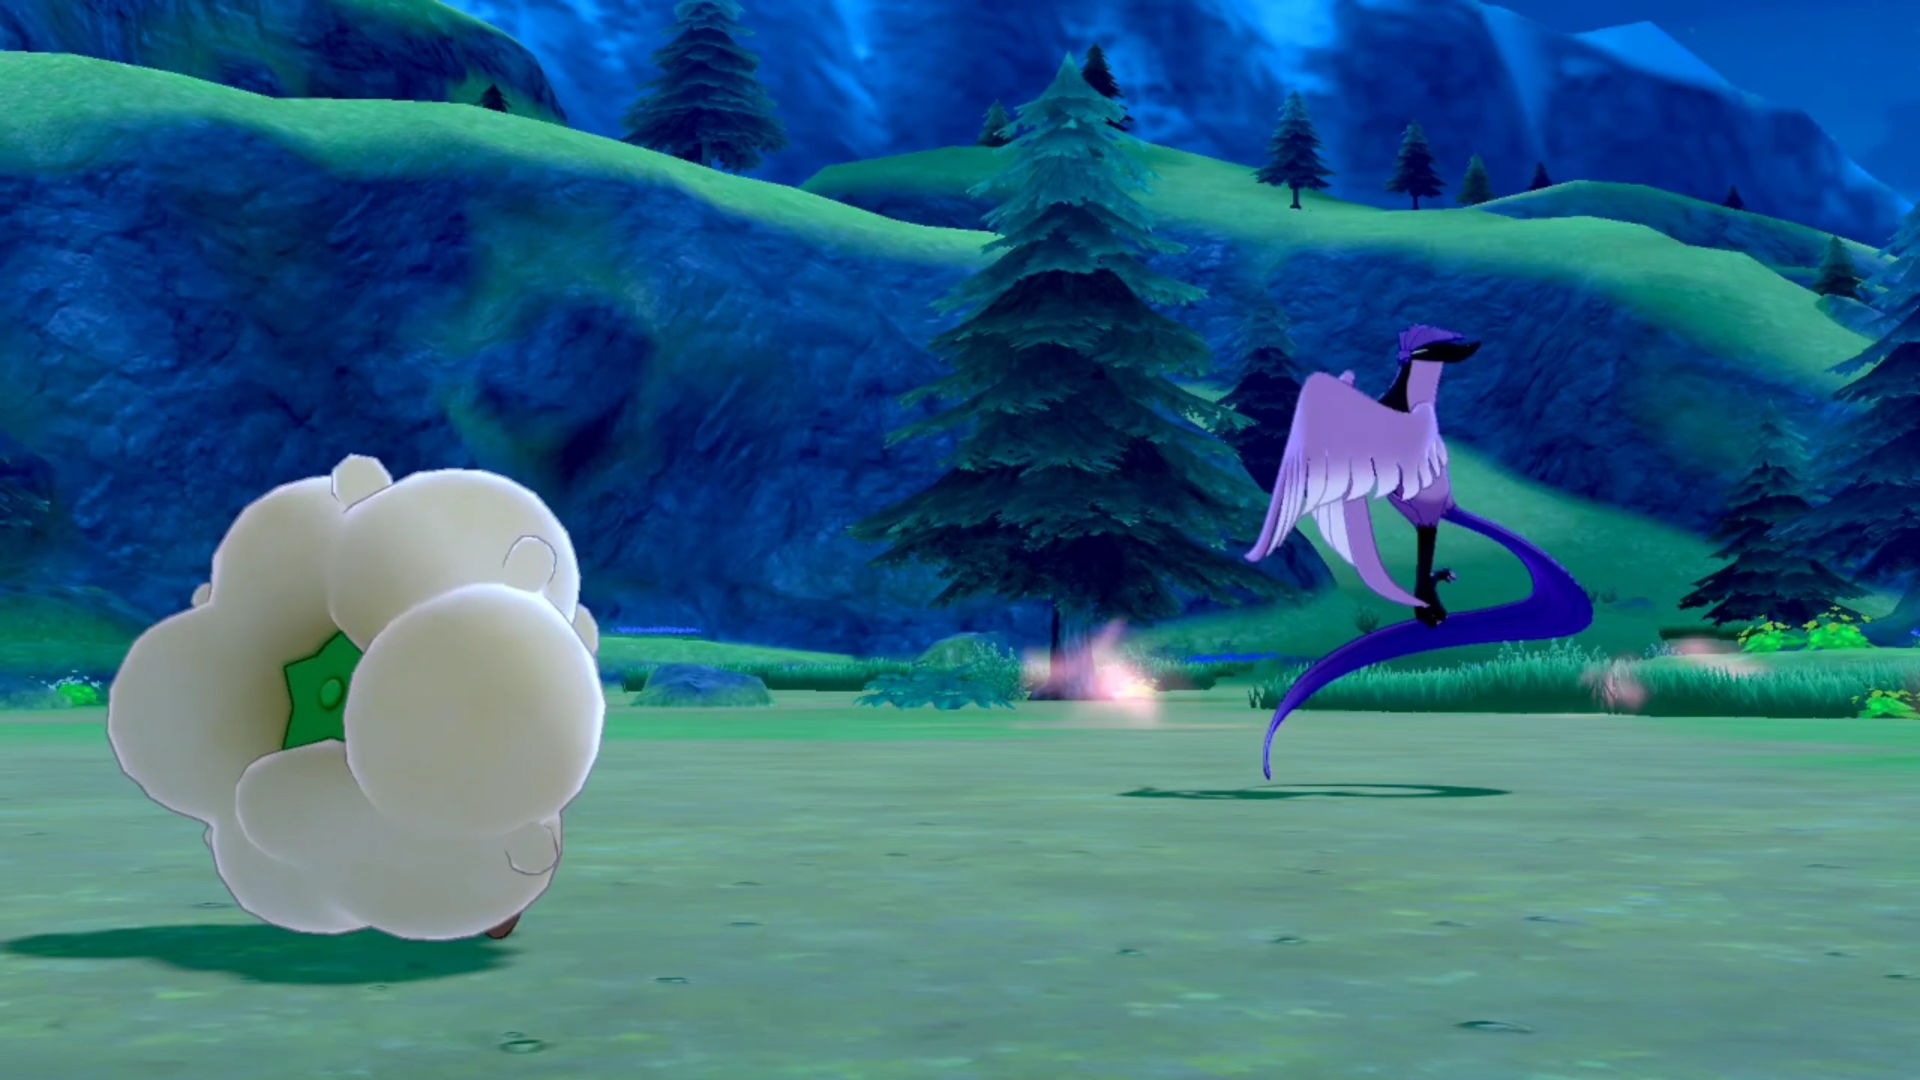 Pokémon Sword and Shield Galarian Articuno: Encounter with Galarian Articuno in a field. Trainer is using Whimsicott.